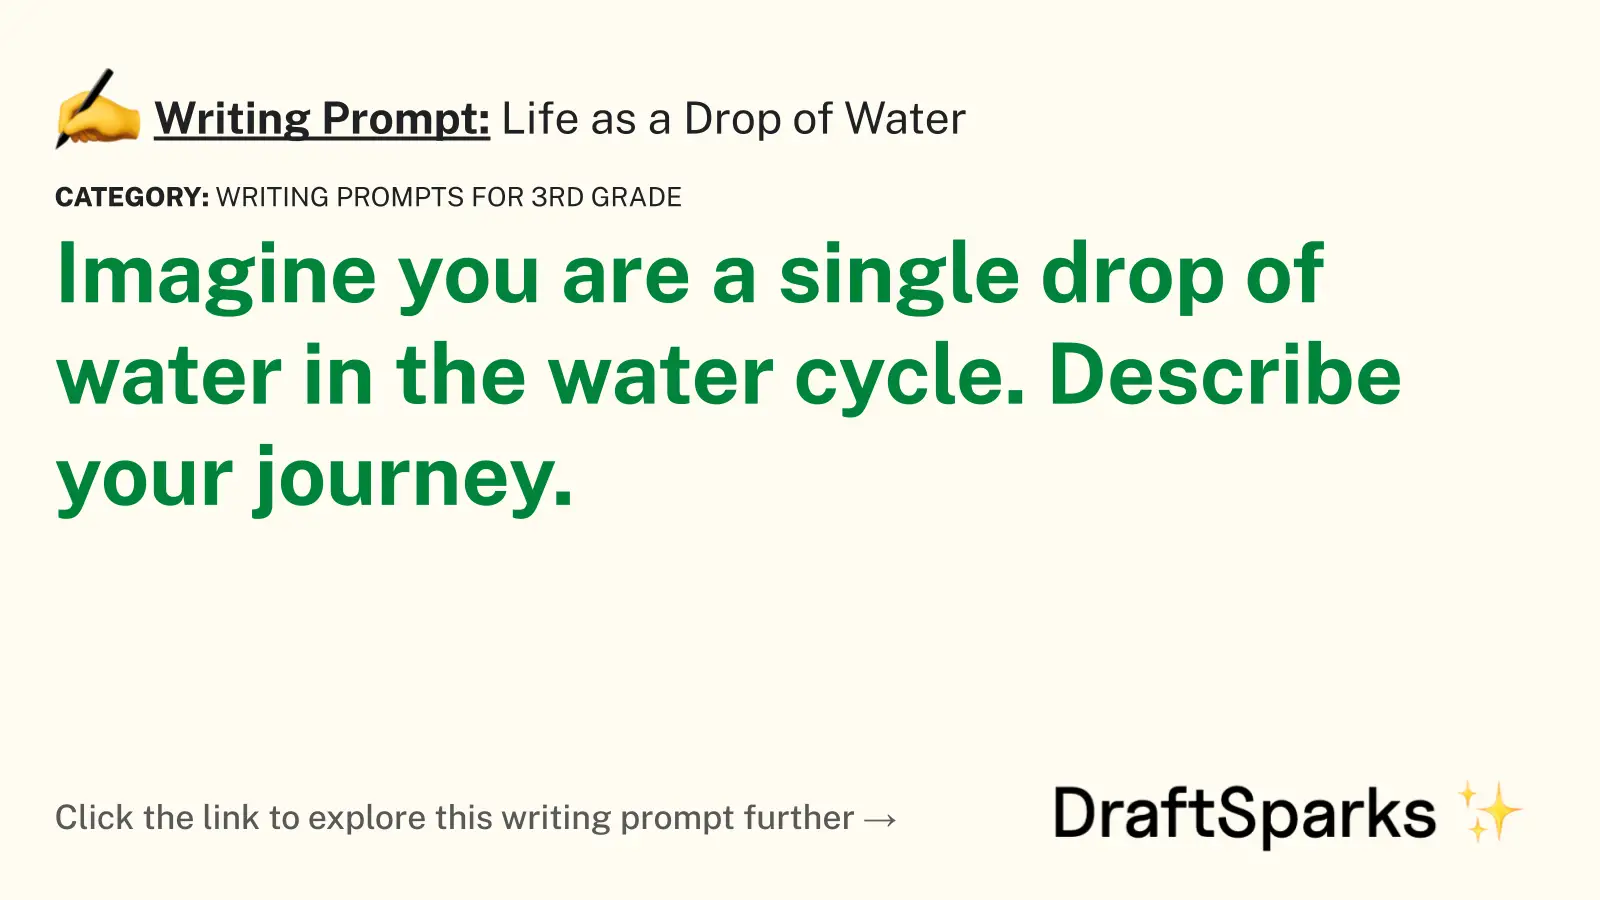 Life as a Drop of Water